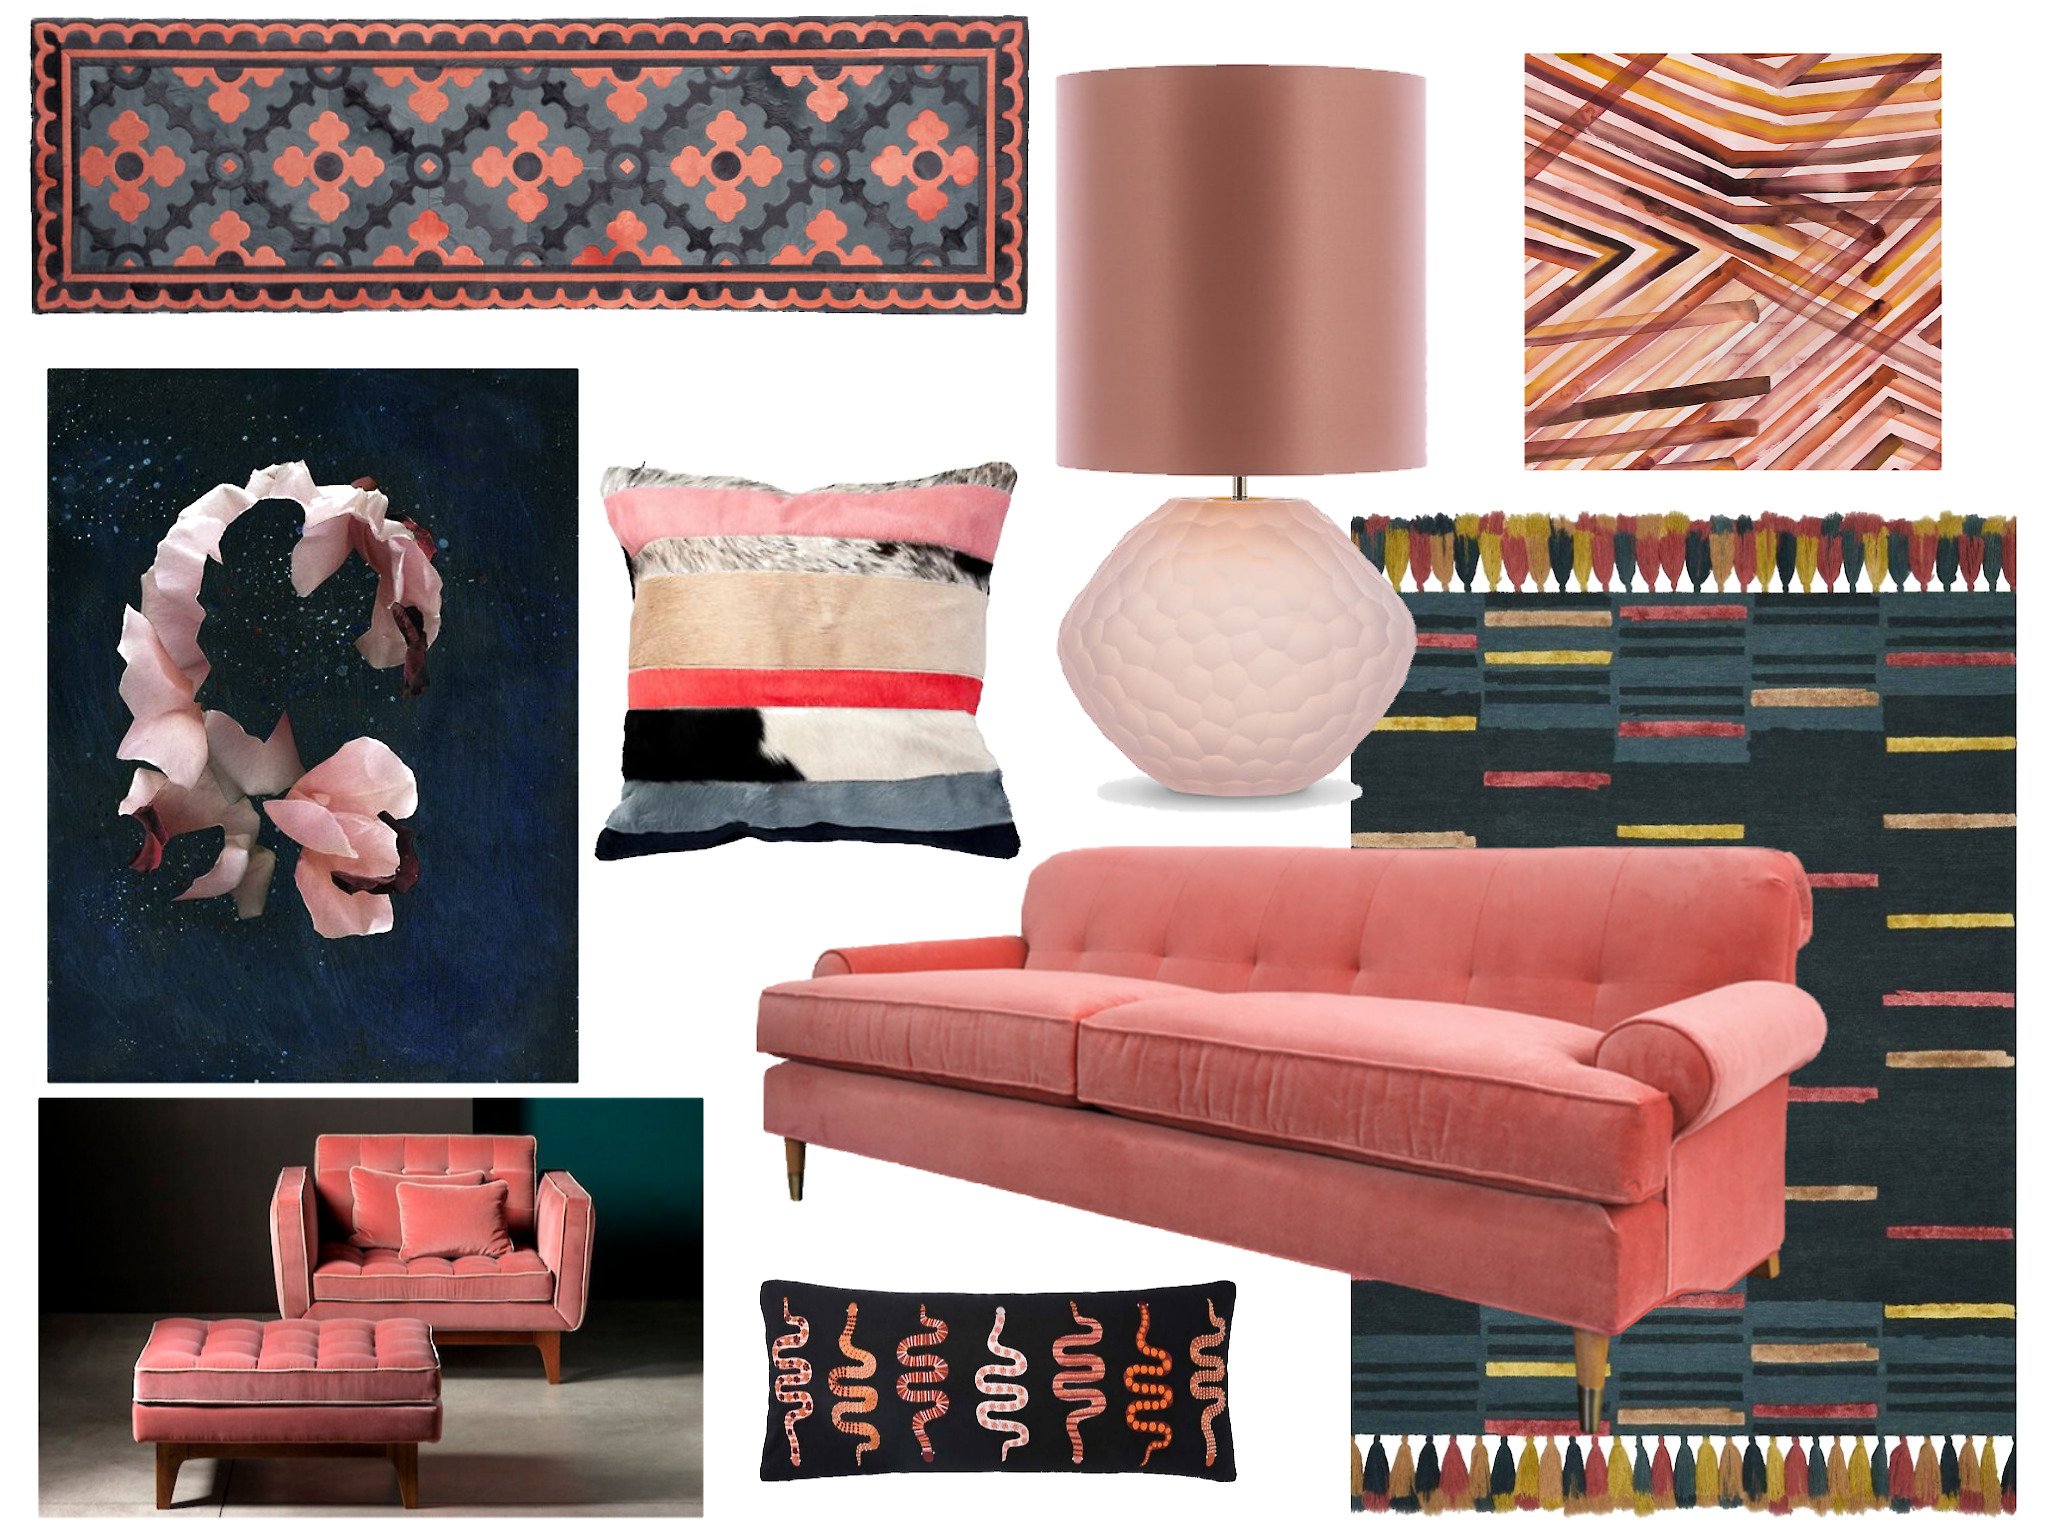 Courageous Coral Rose & Black by Inviting Interior Style.jpg